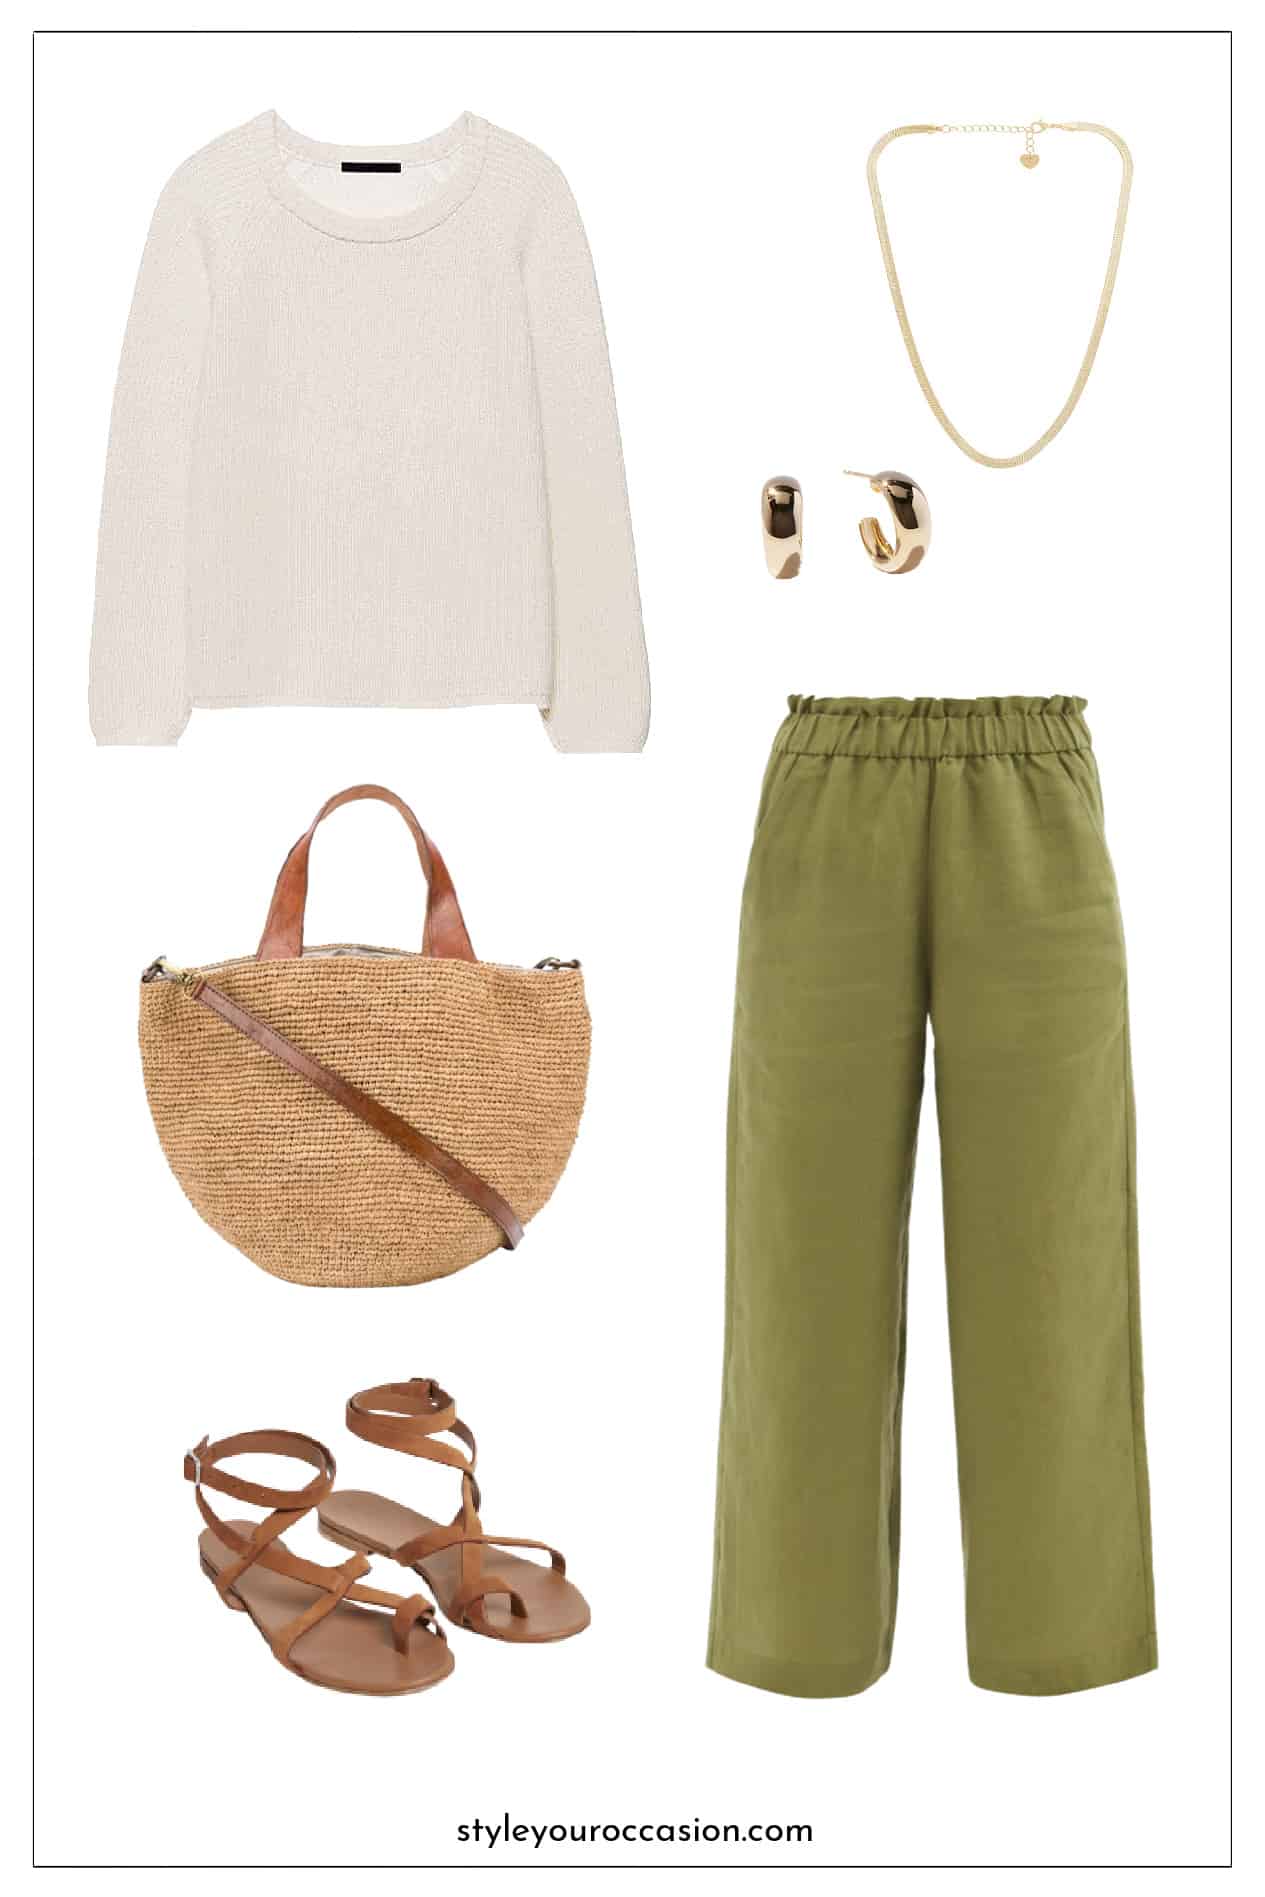 image of a style mood board with an outfit with green linen pants, an ivory sweater, gold jewelry, a straw bag, and brown leather sandals